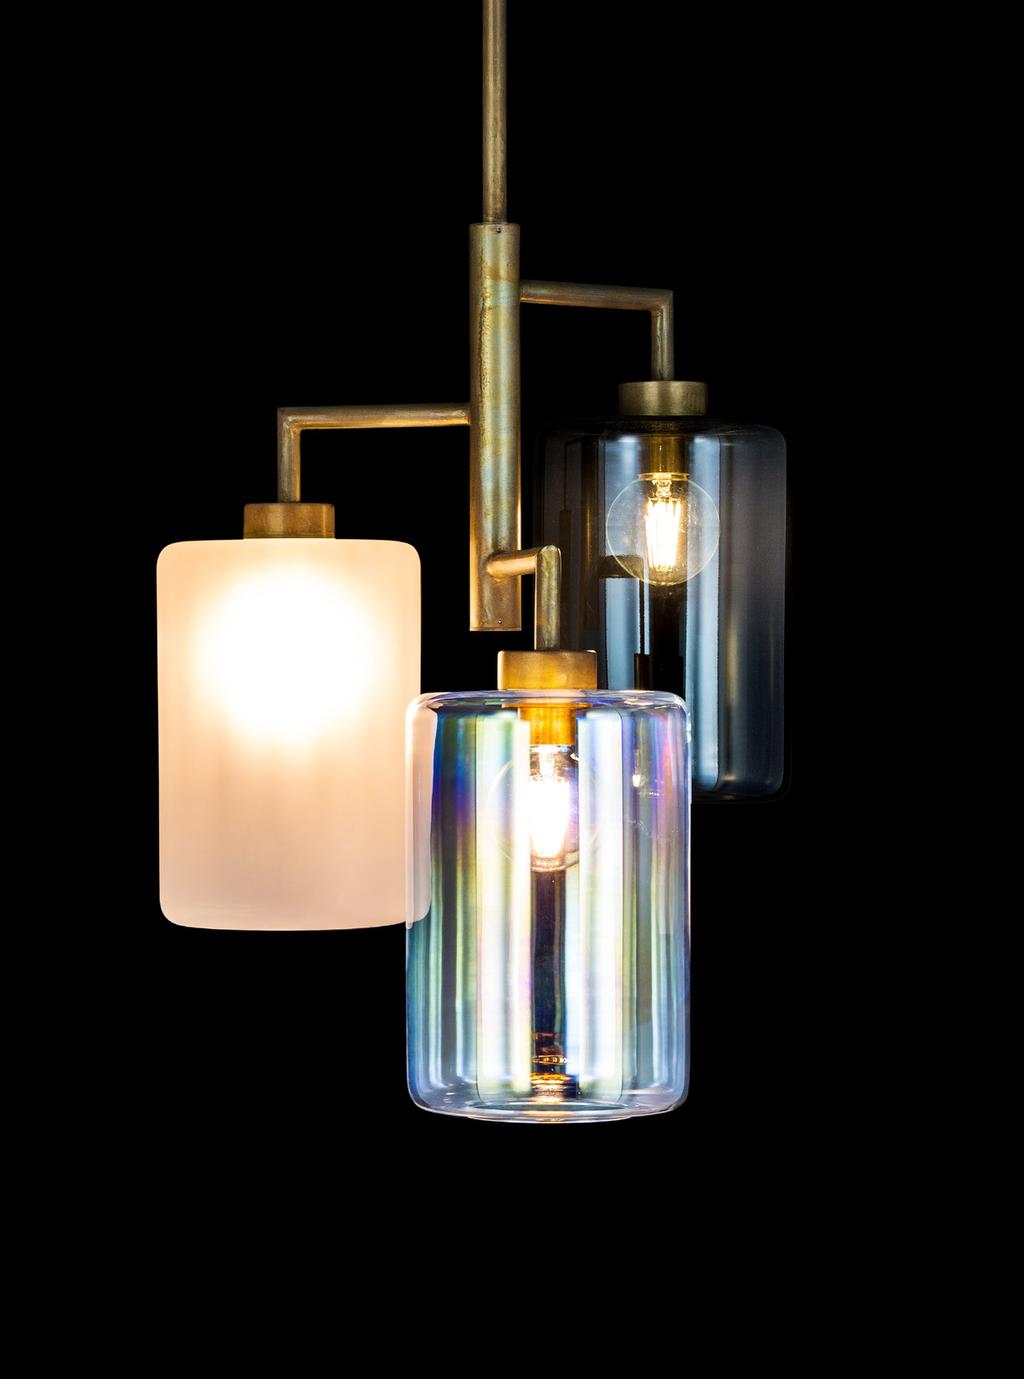 Standard the frame is available in burnished brass, and the lanterns in 4 different types of glass: bronze, clear satin, grey and iridescent.